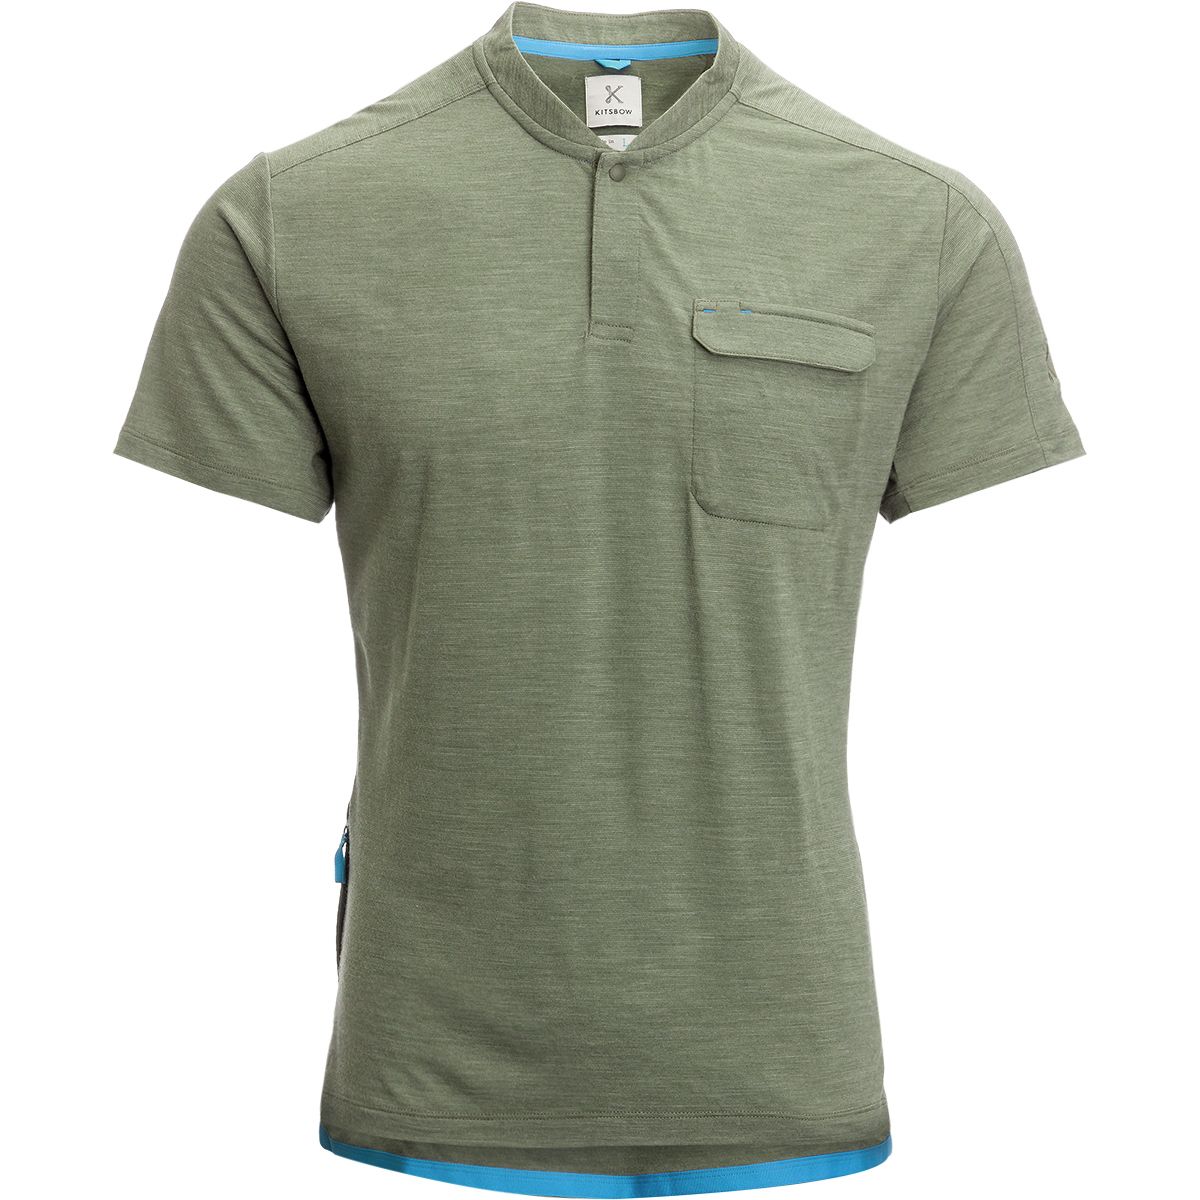 Kitsbow Collared Henley Jersey - Men's